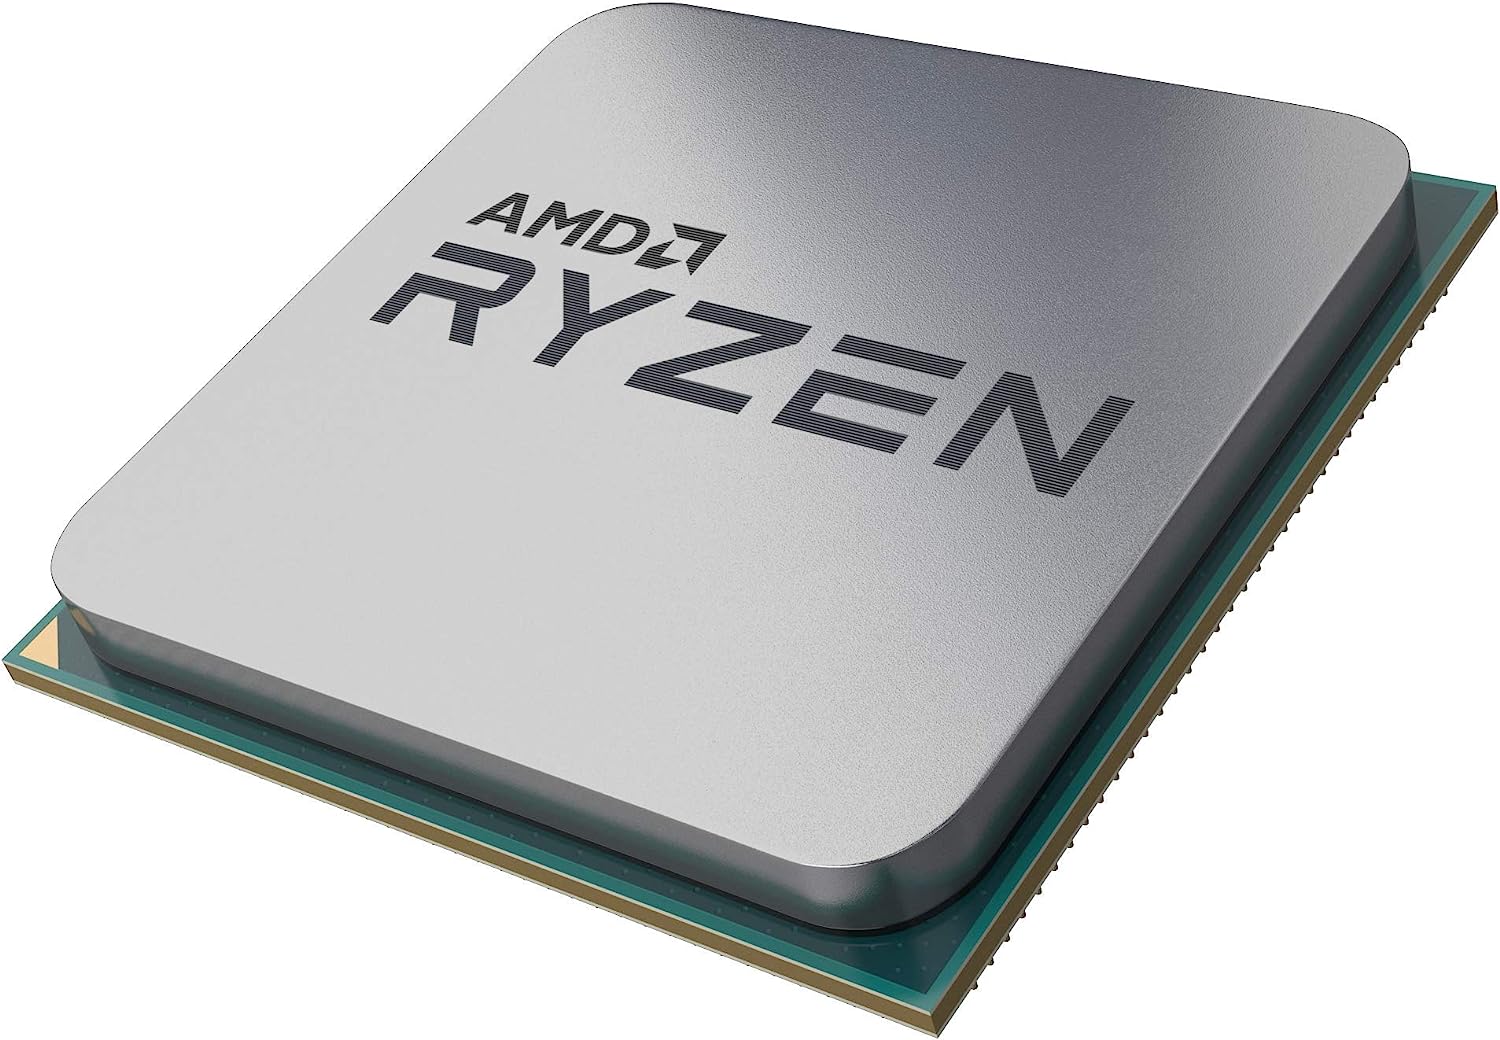 AMD Ryzen 5 2600 Processor with Wraith Stealth Cooler - $120